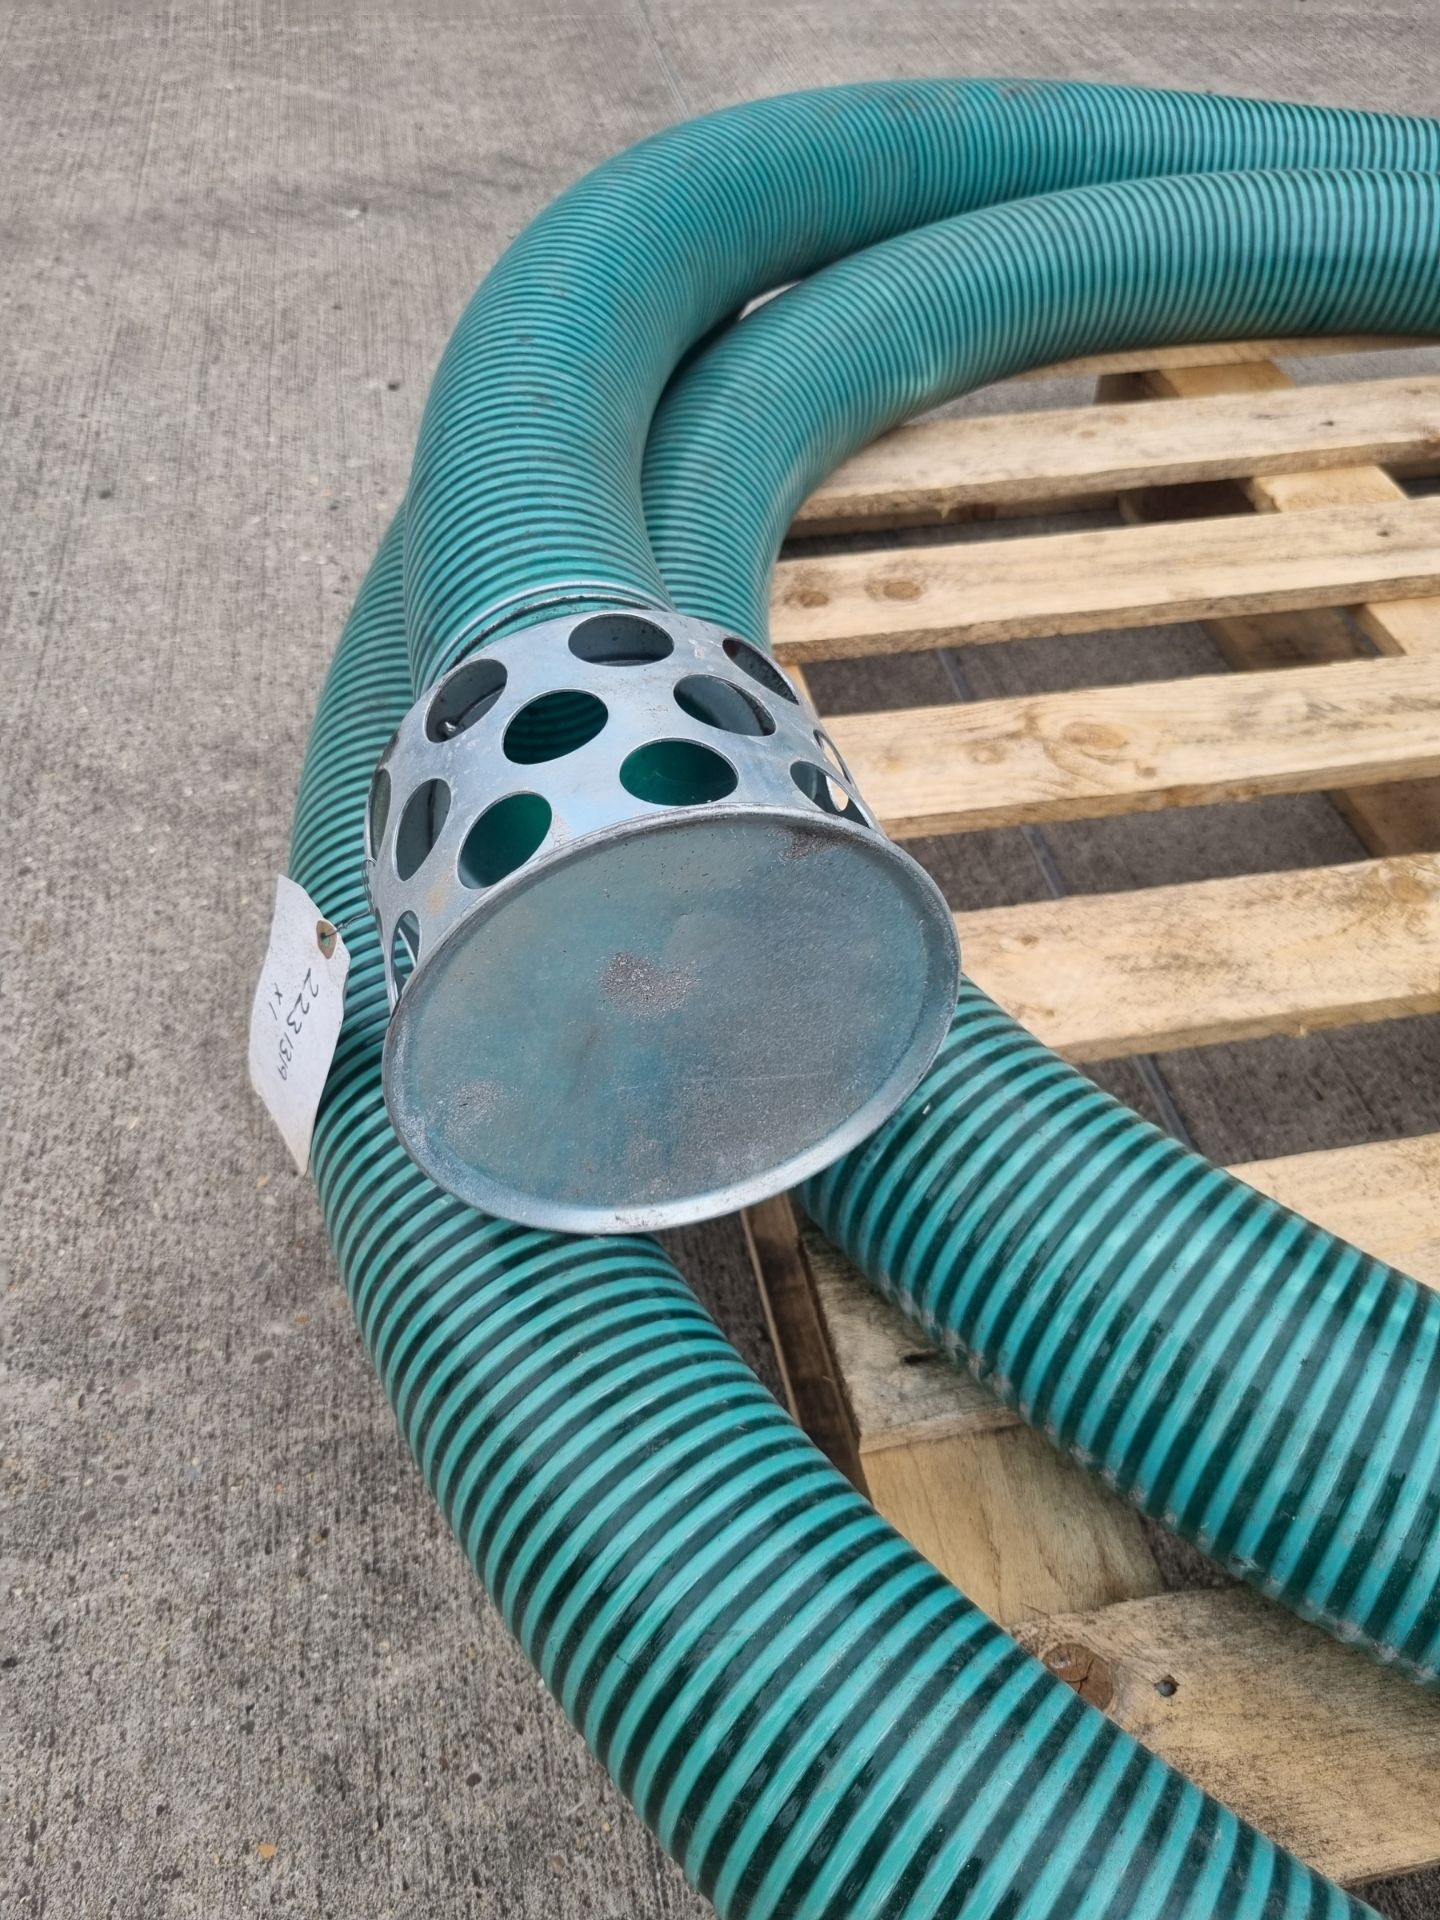 Can strainer water filter & hose - Unknown length - Image 3 of 5